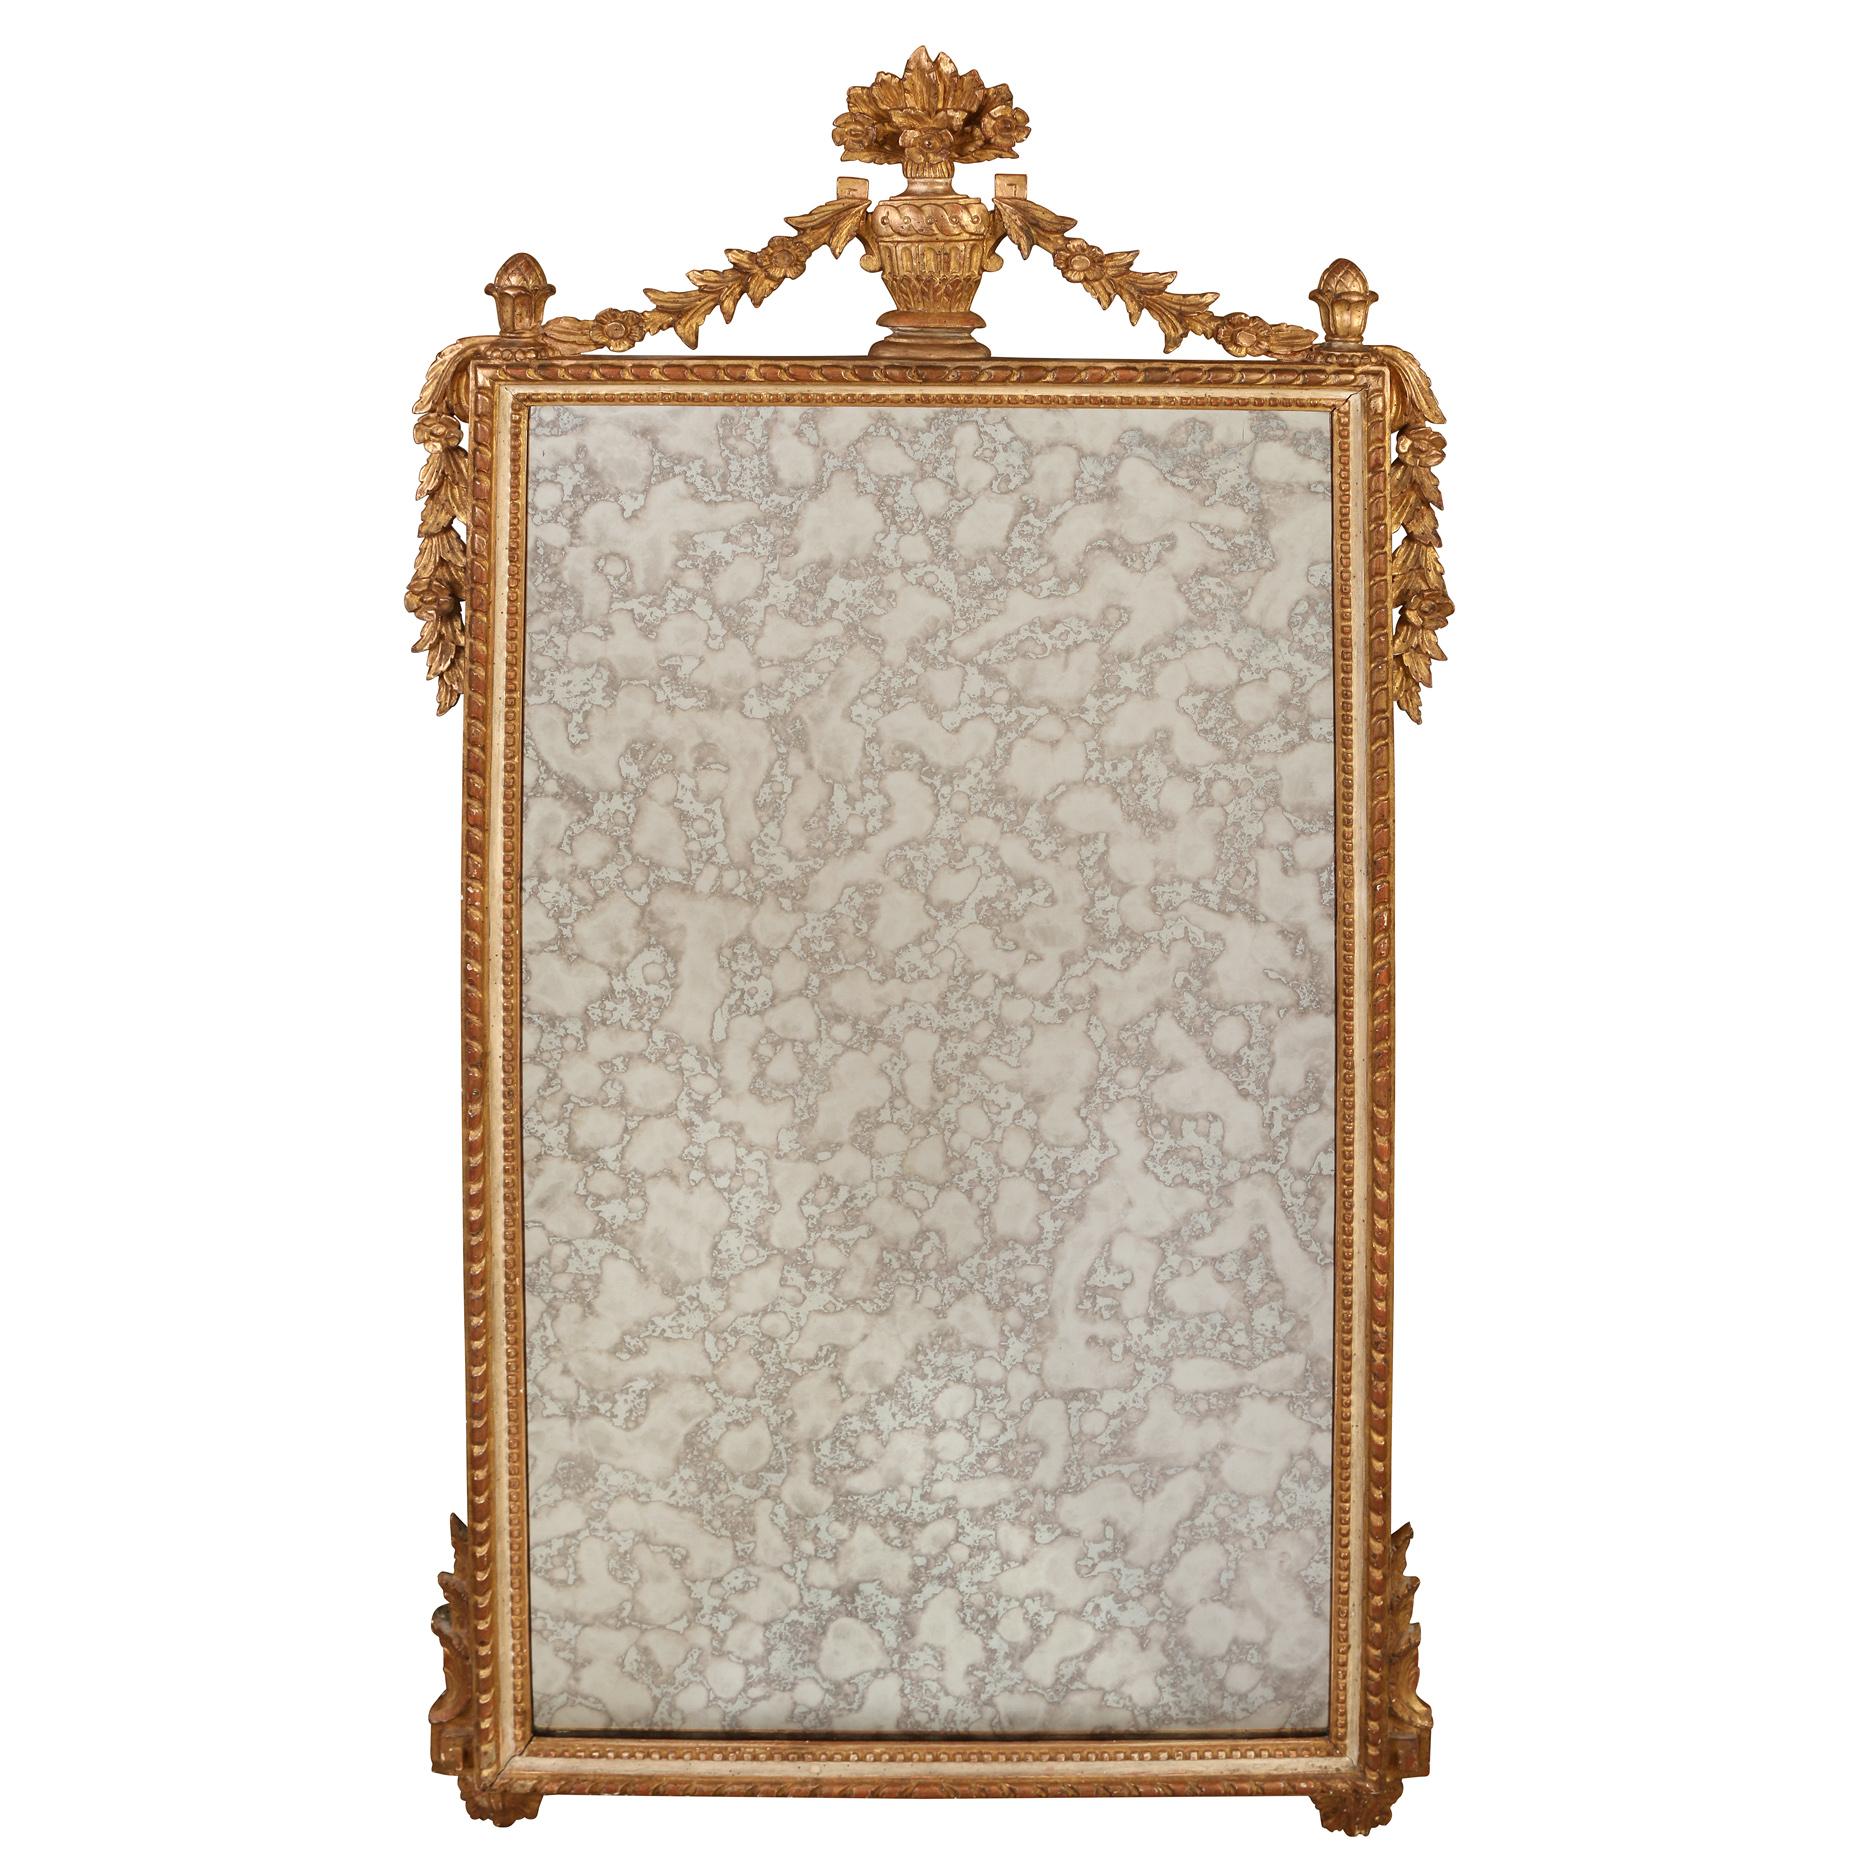 Neoclassical Giltwood Mirror With Urn and Garland Crest In Good Condition For Sale In Locust Valley, NY